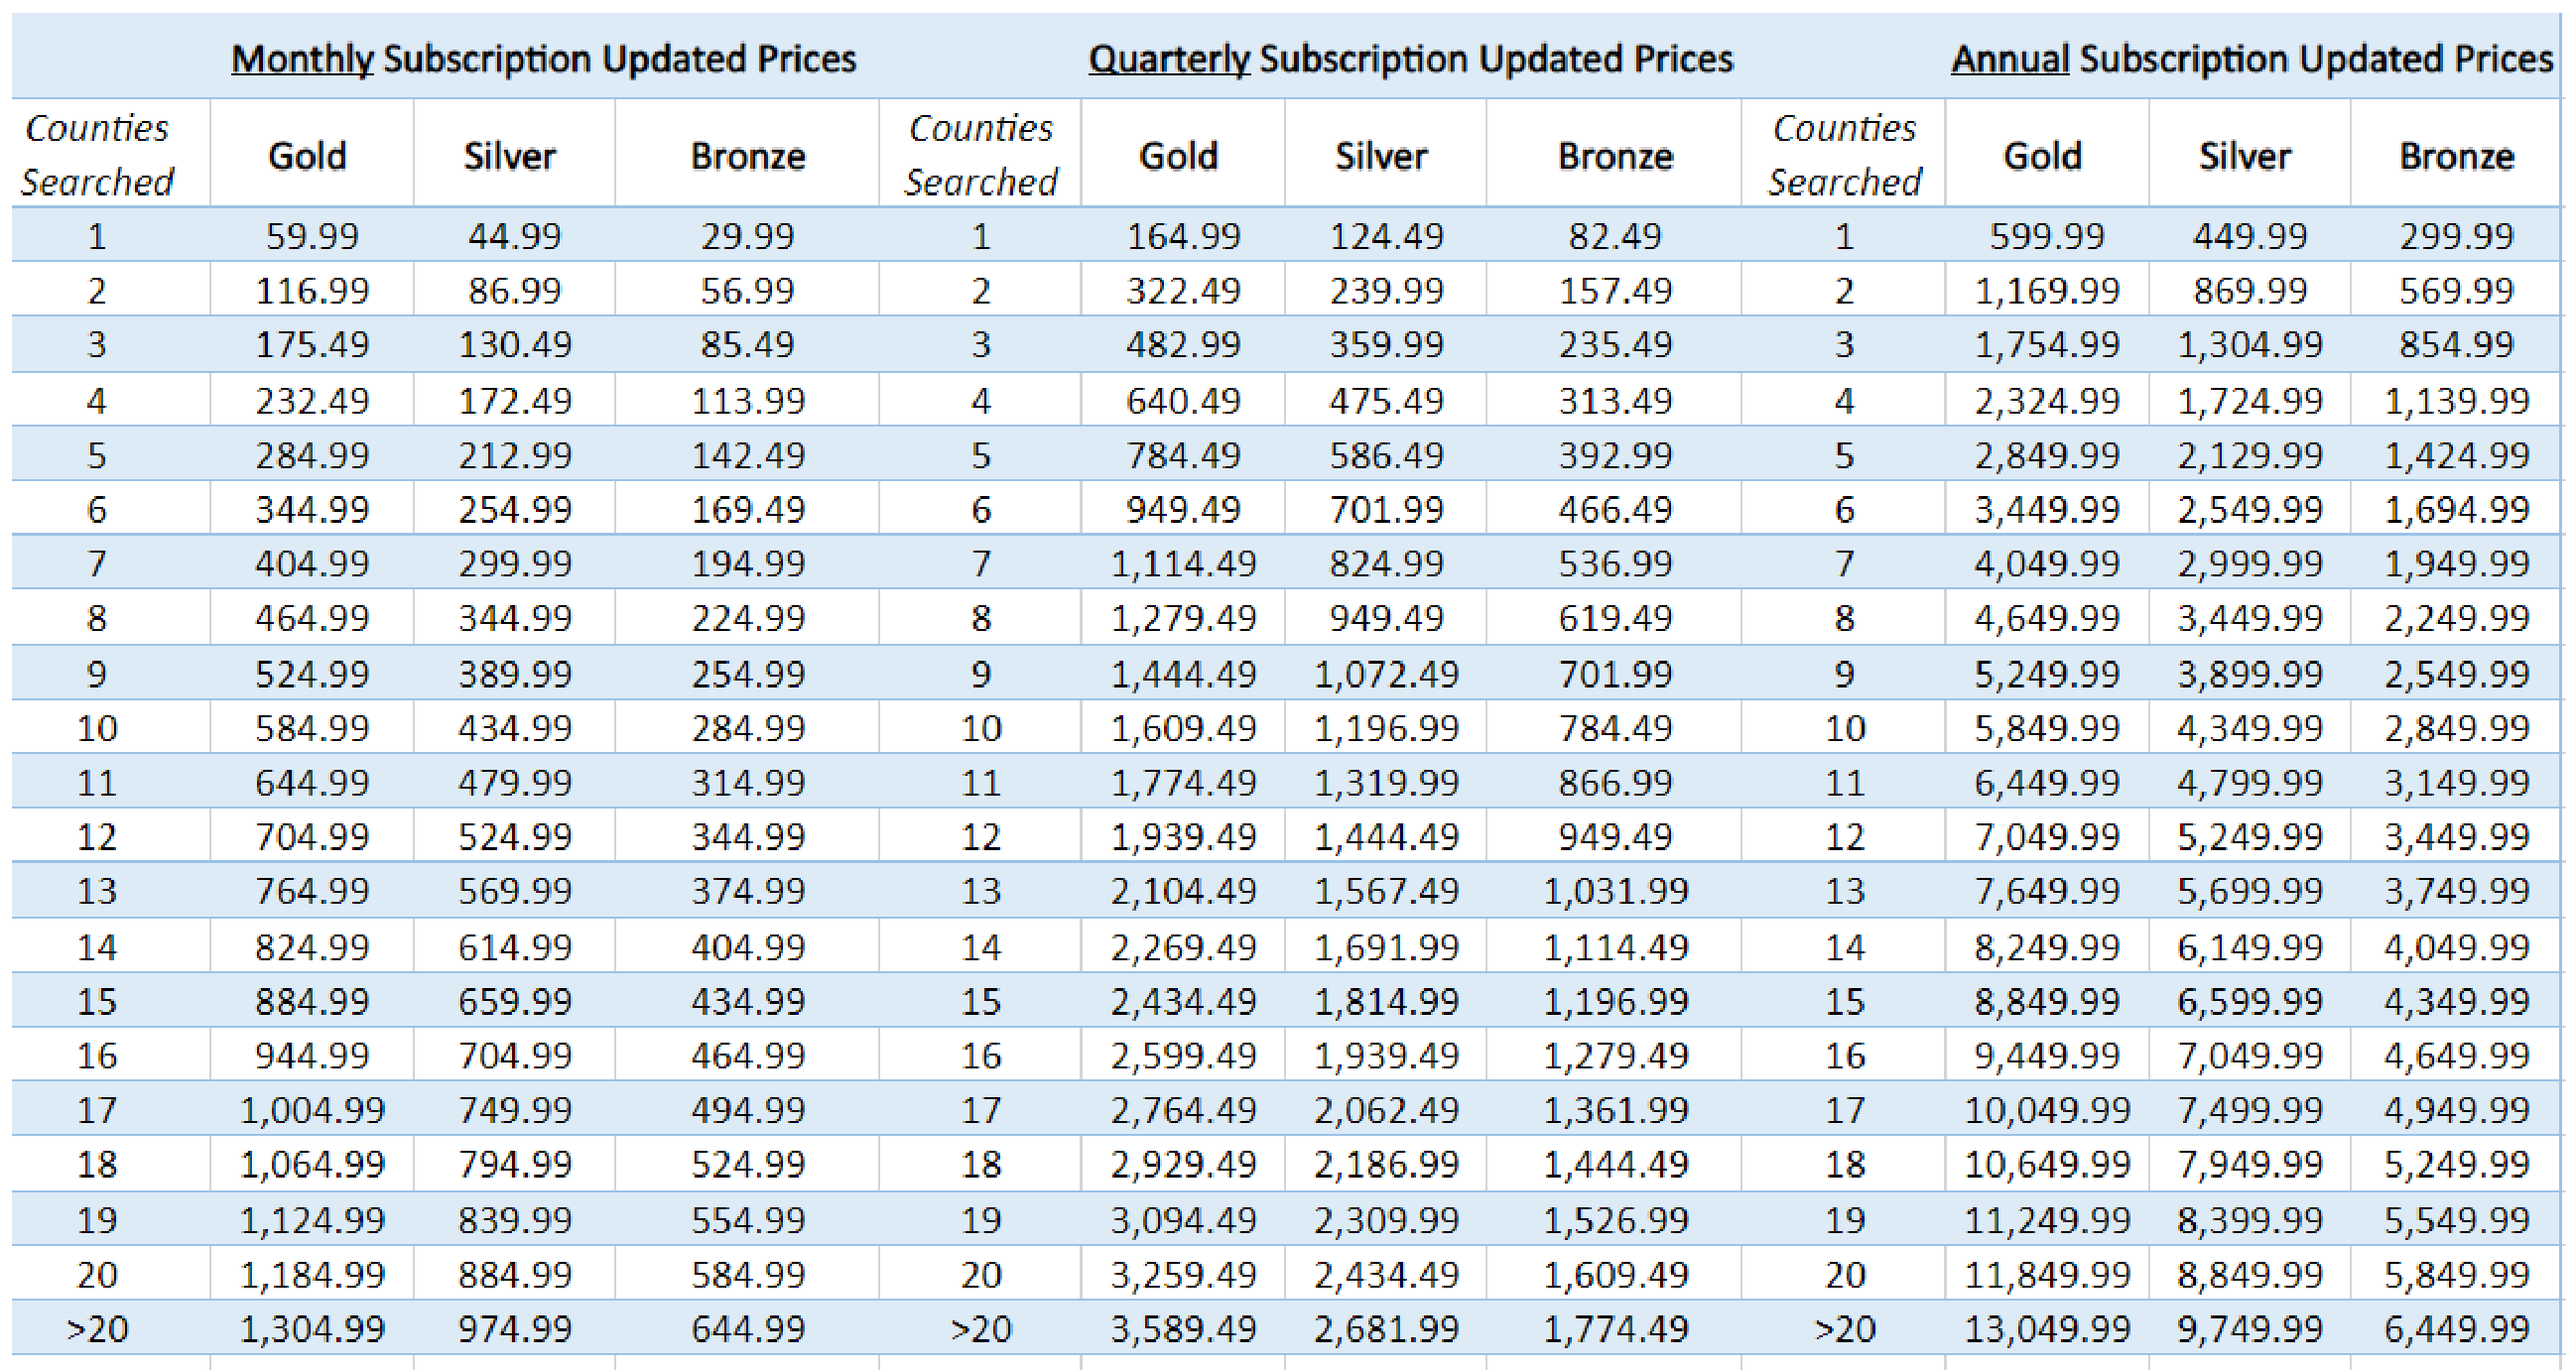 Current Subscription Prices